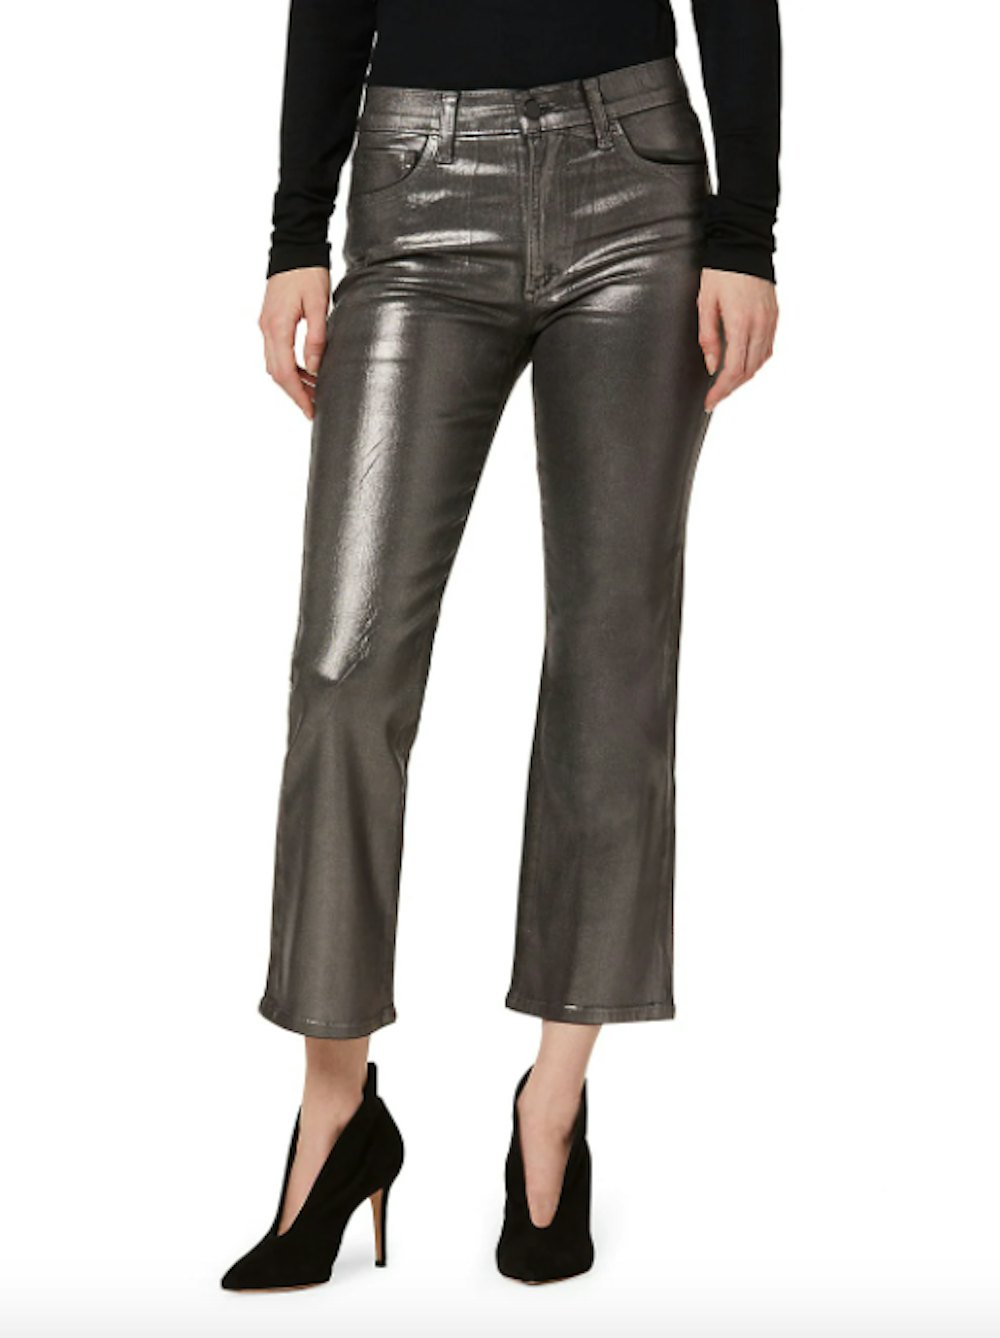 Callie Metallic Cropped Jeans